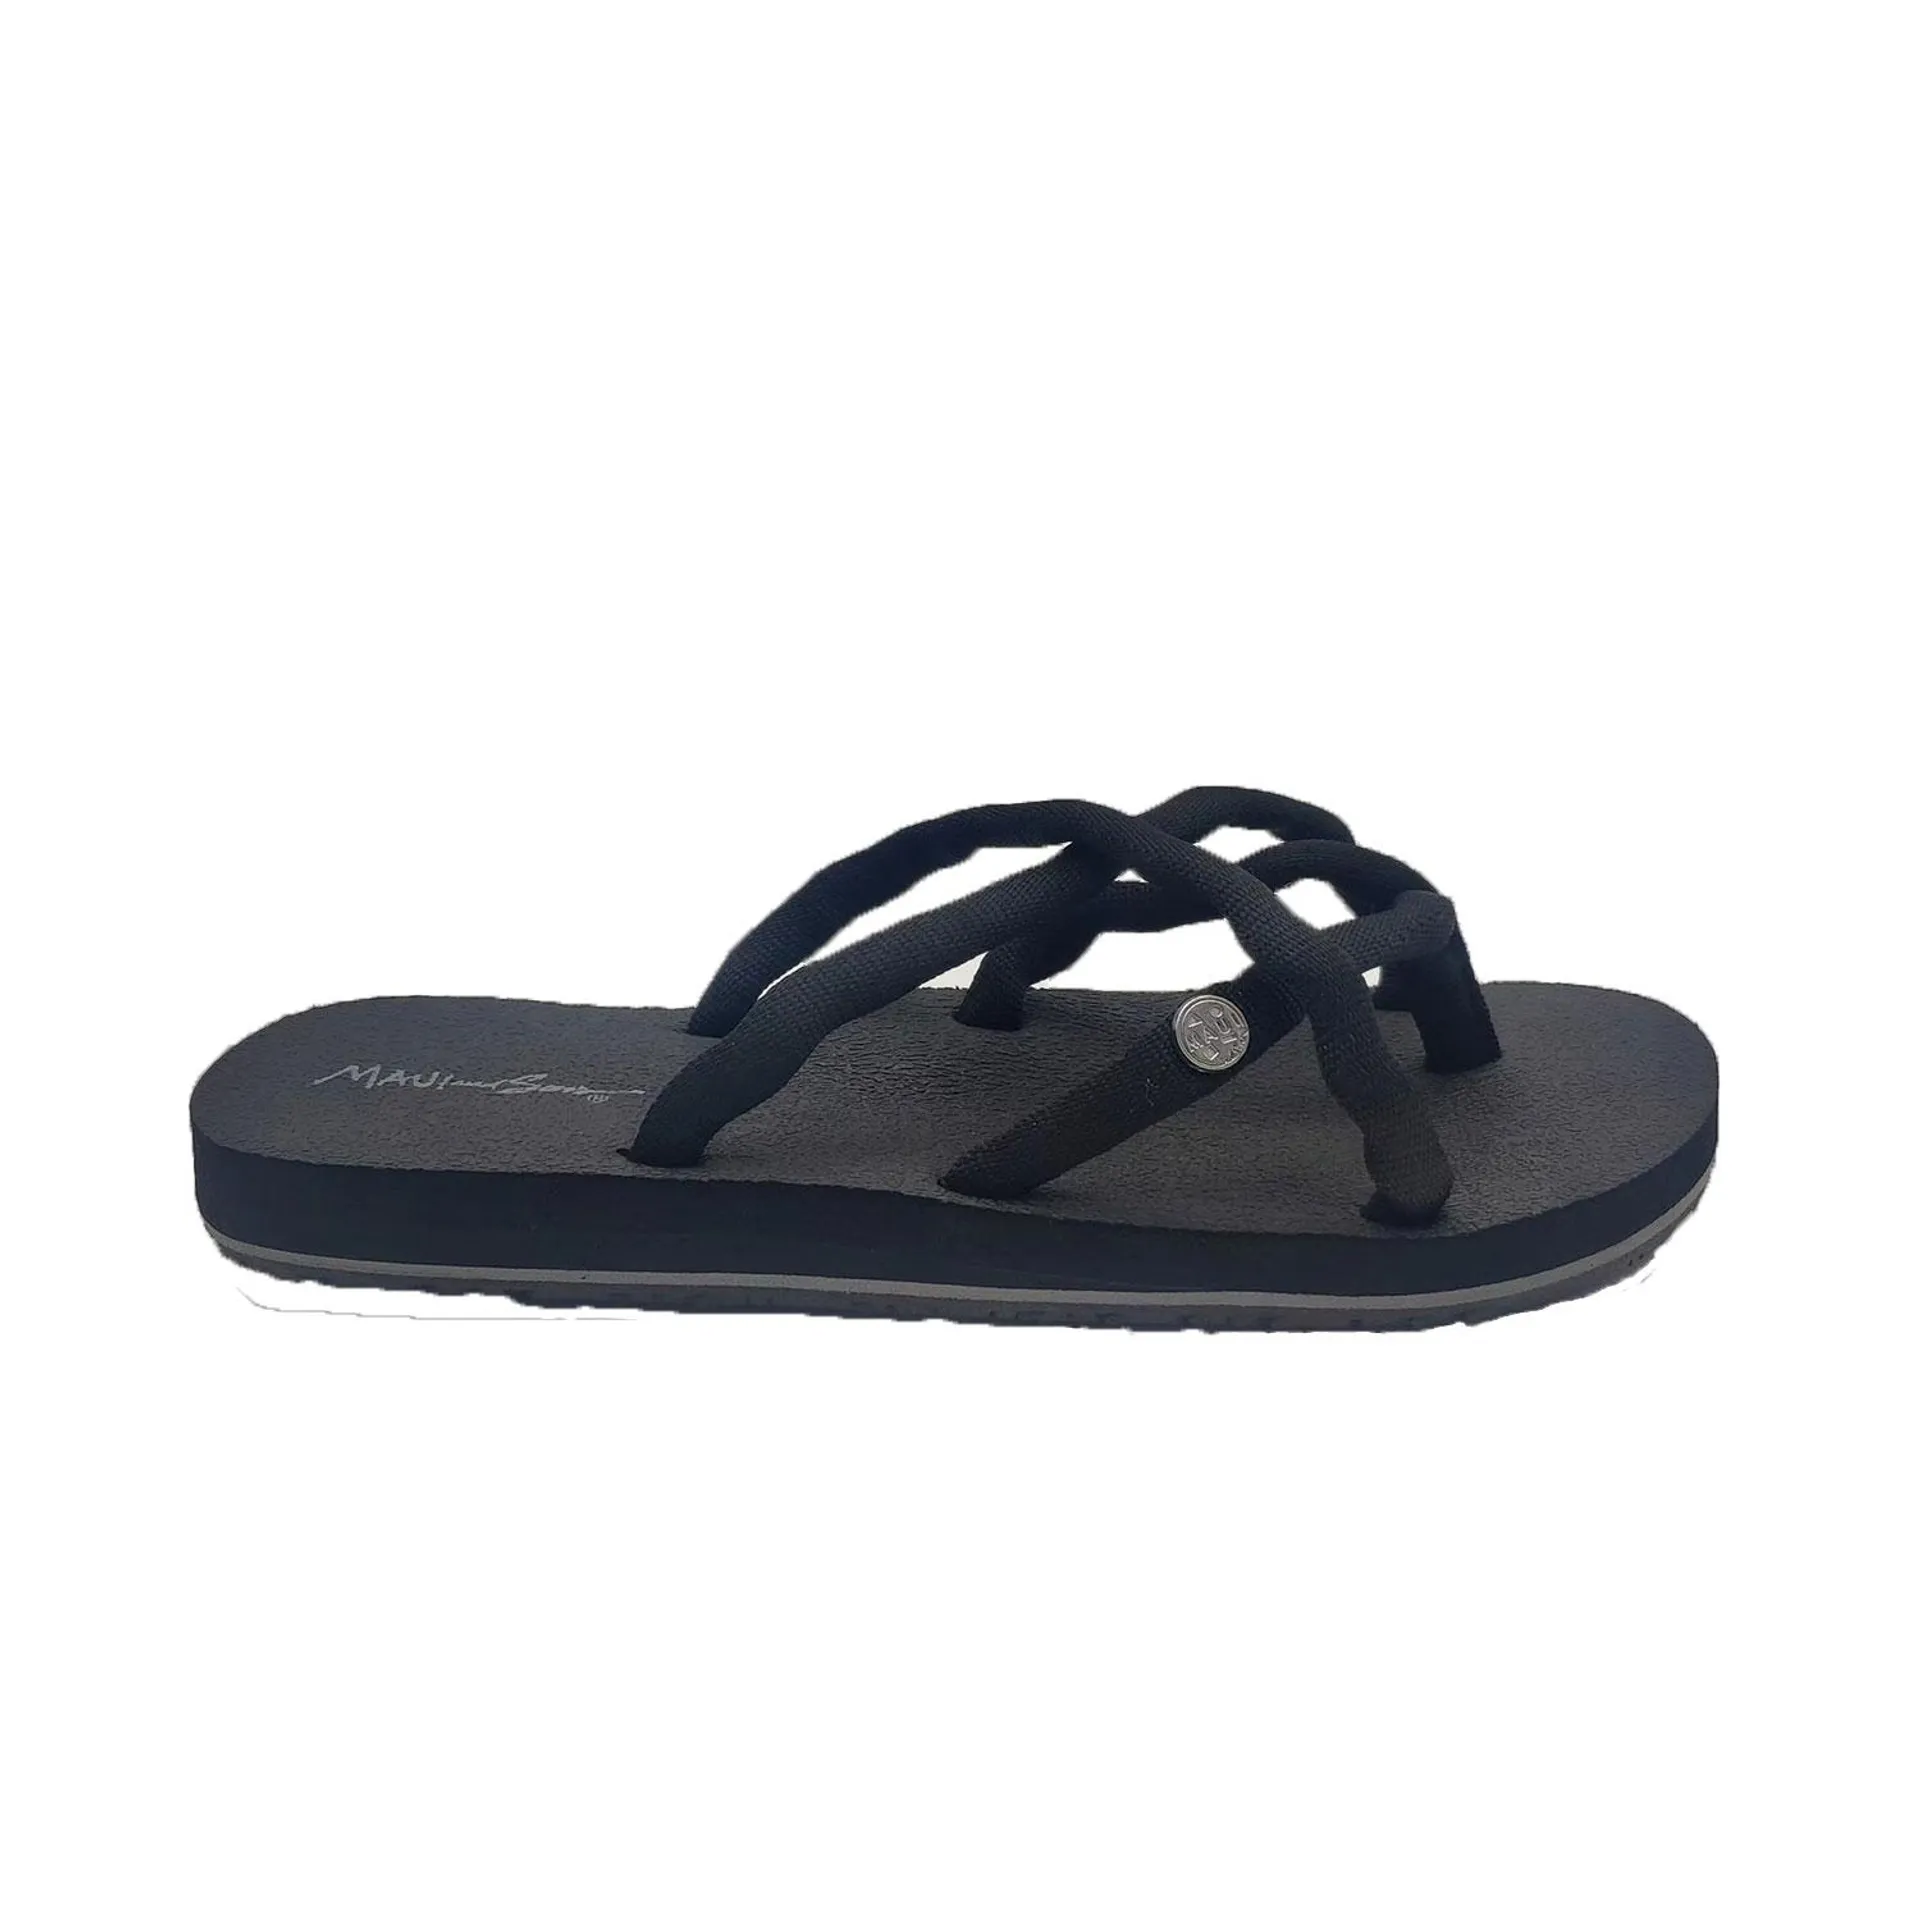 Maui & Sons Coozie Ananda Strap Women's Flip-Flops